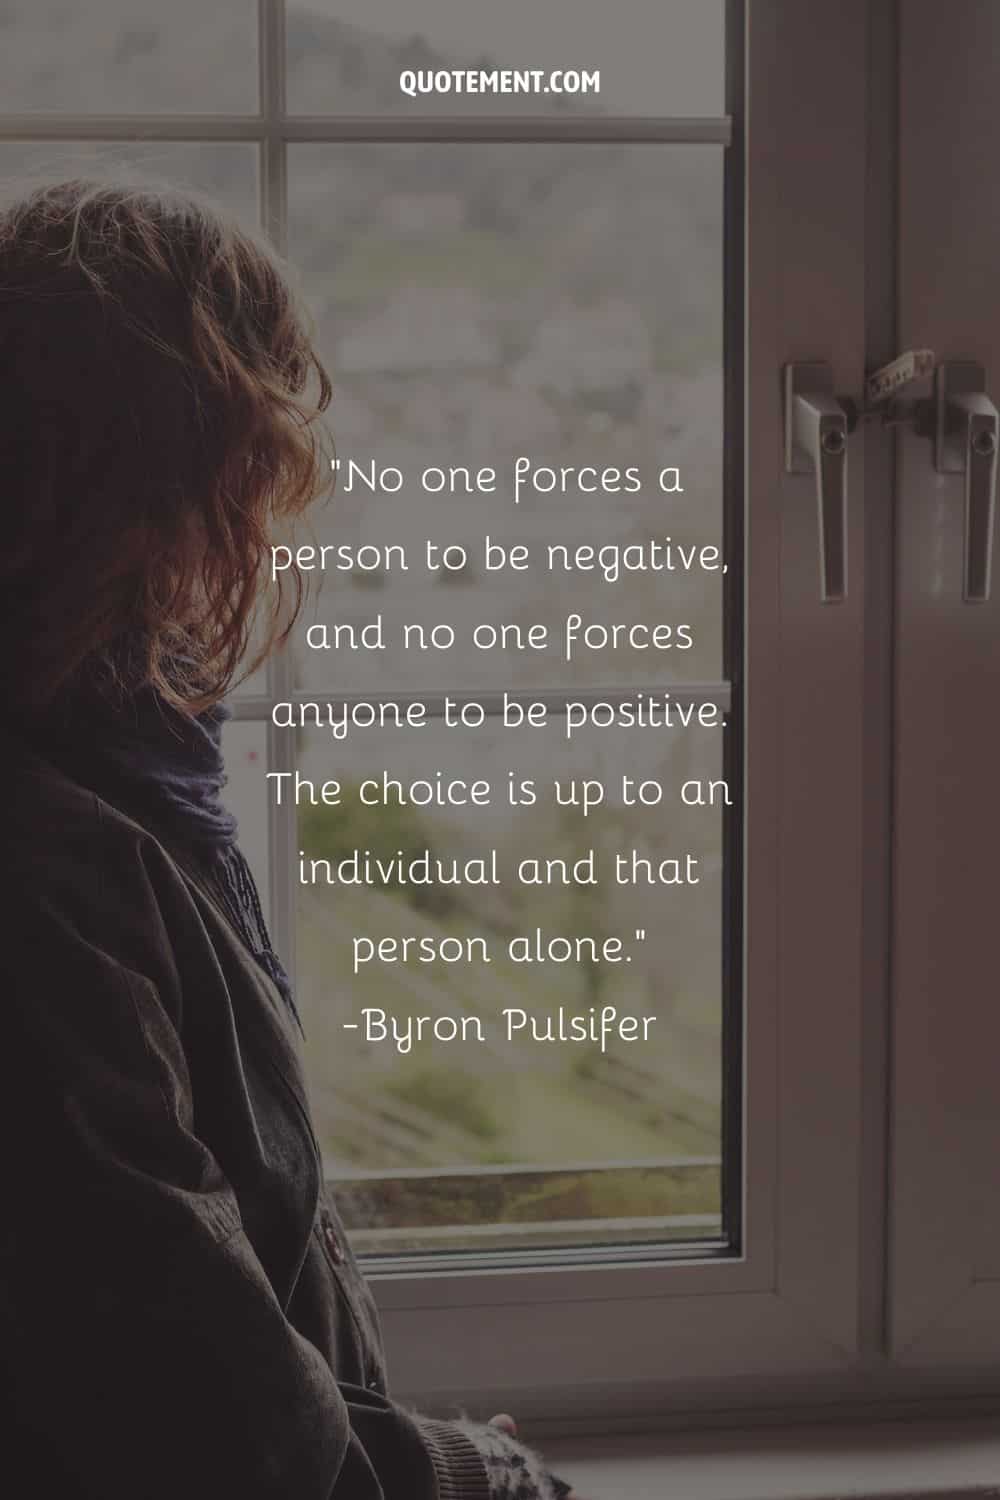 No one forces a person to be negative, and no one forces anyone to be positive